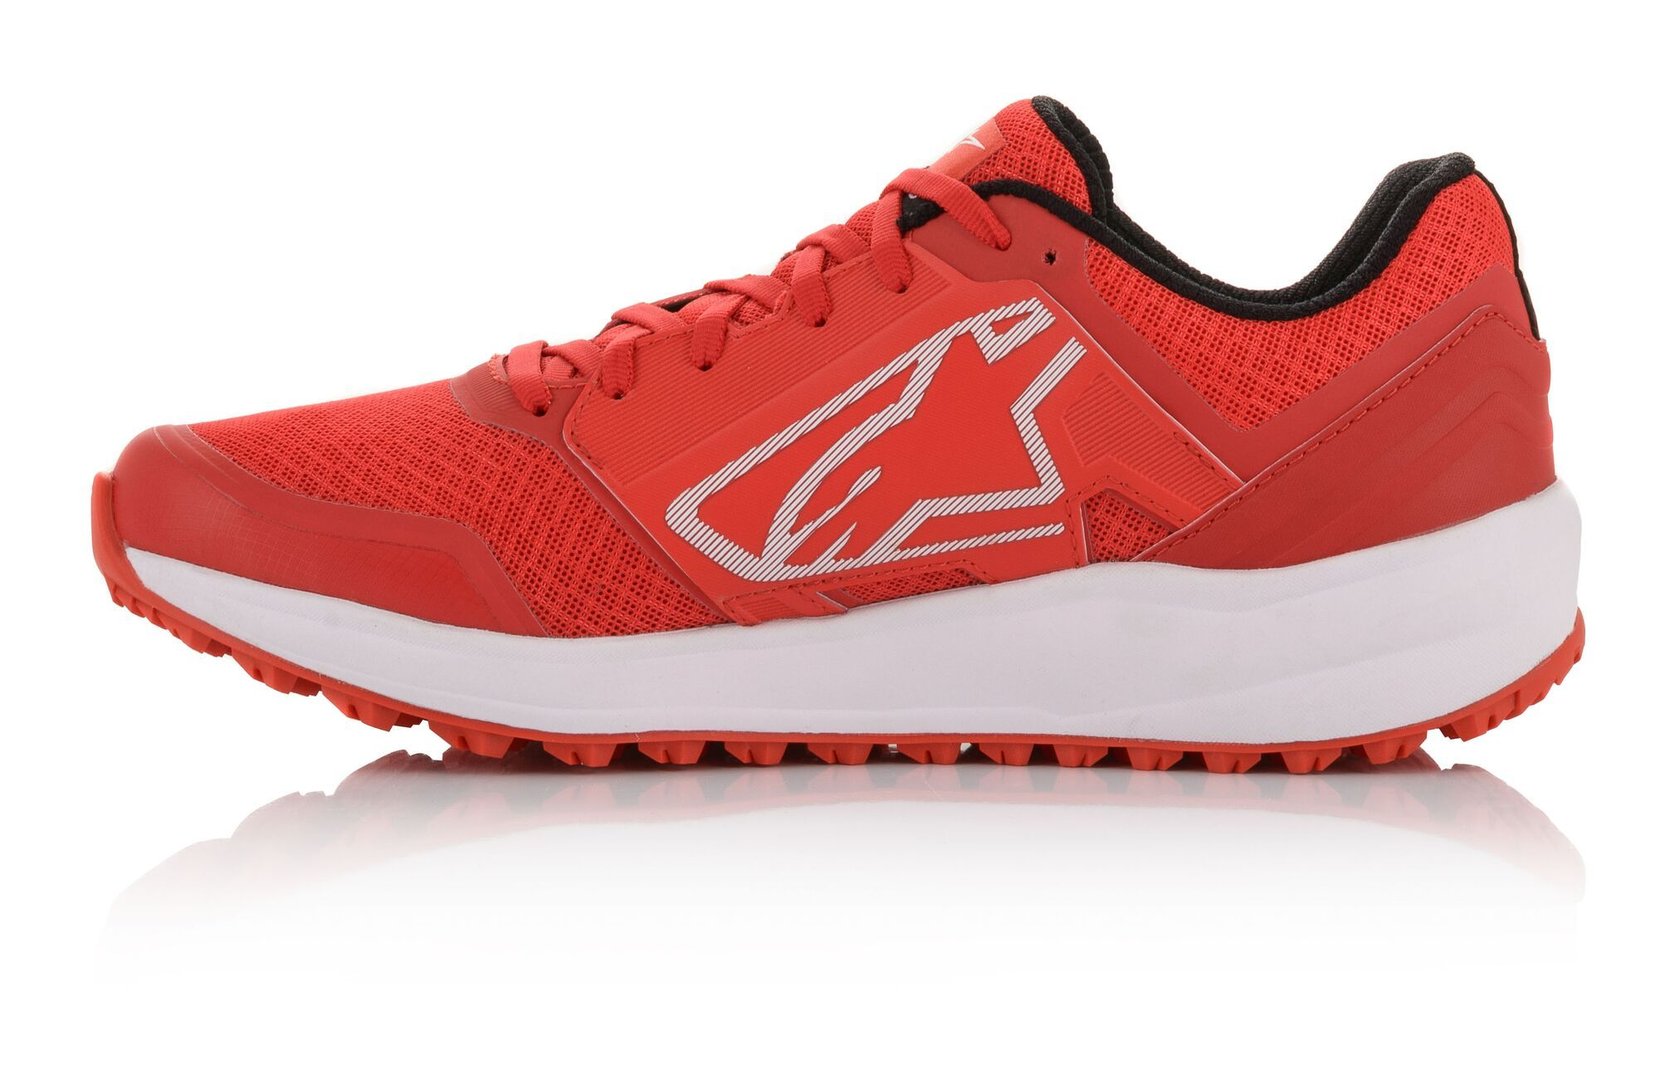 ALPINESTARS 2654820_32_10 META TRAIL RUNNING shoes, red/white, size 43 (10) (Фото-3)